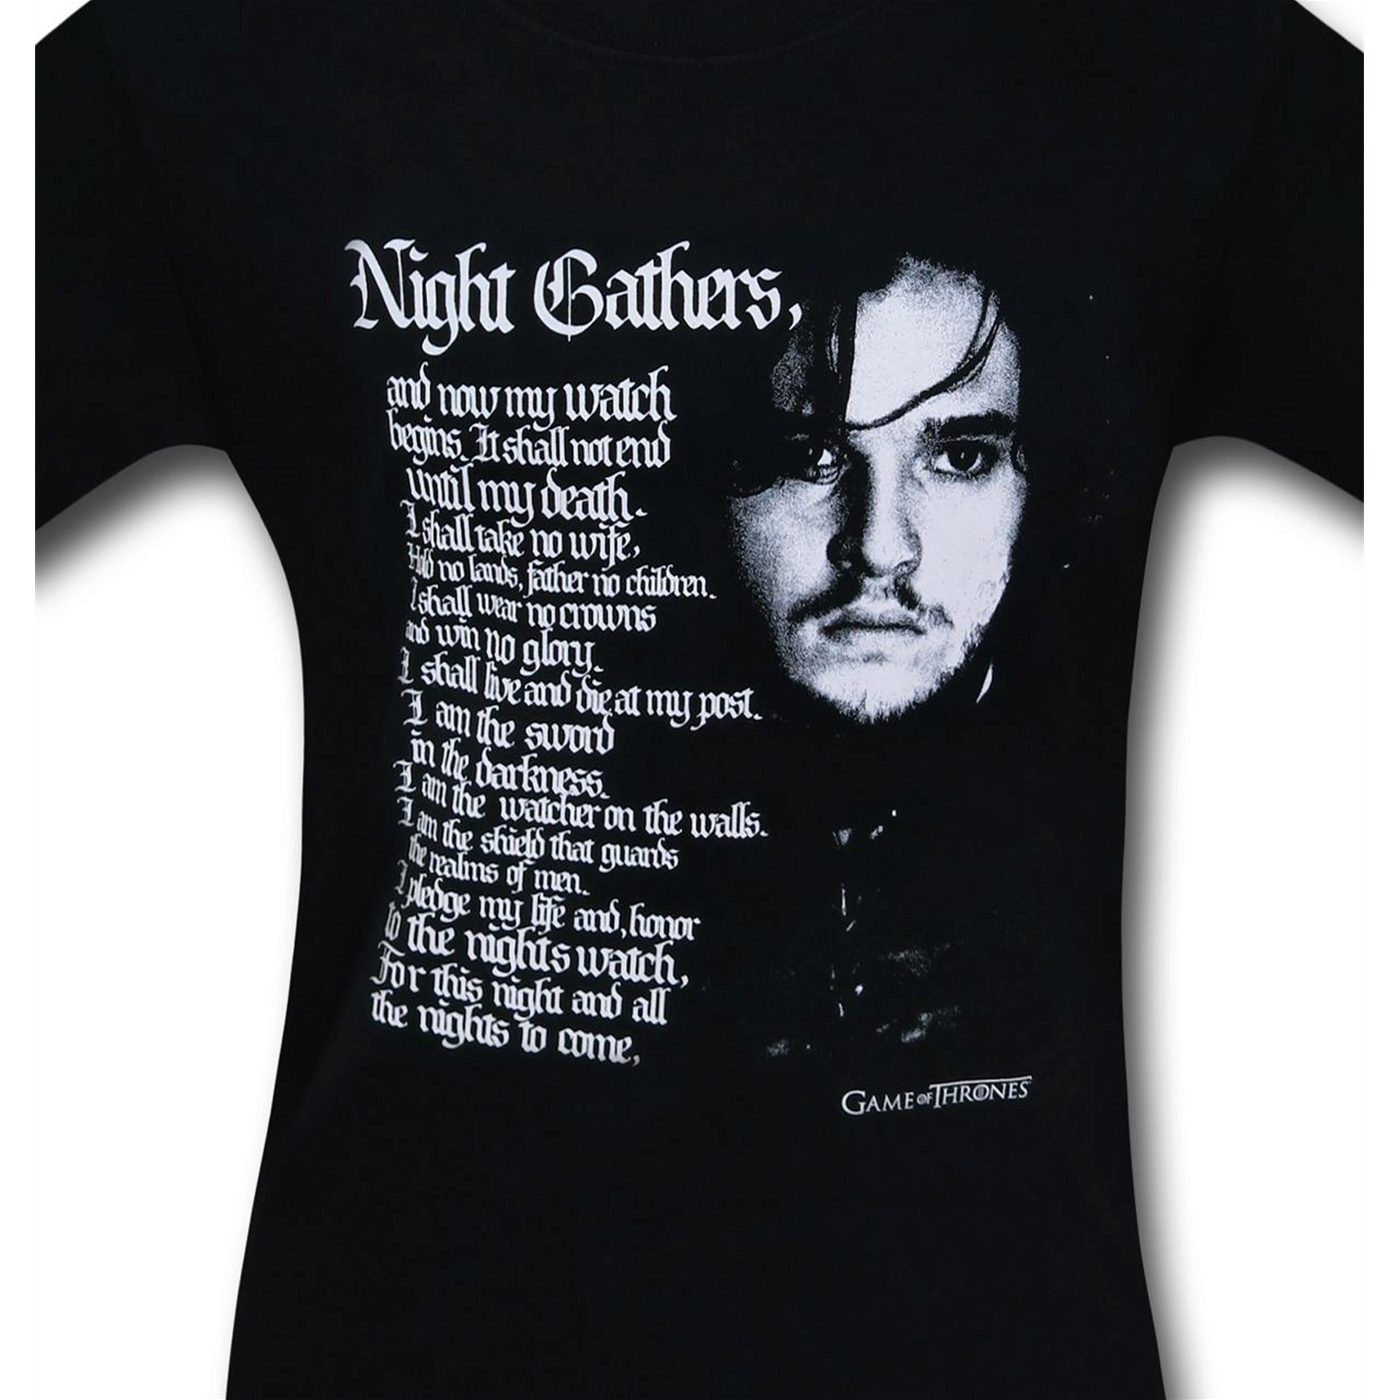 Game of Thrones Night Gathers T-Shirt